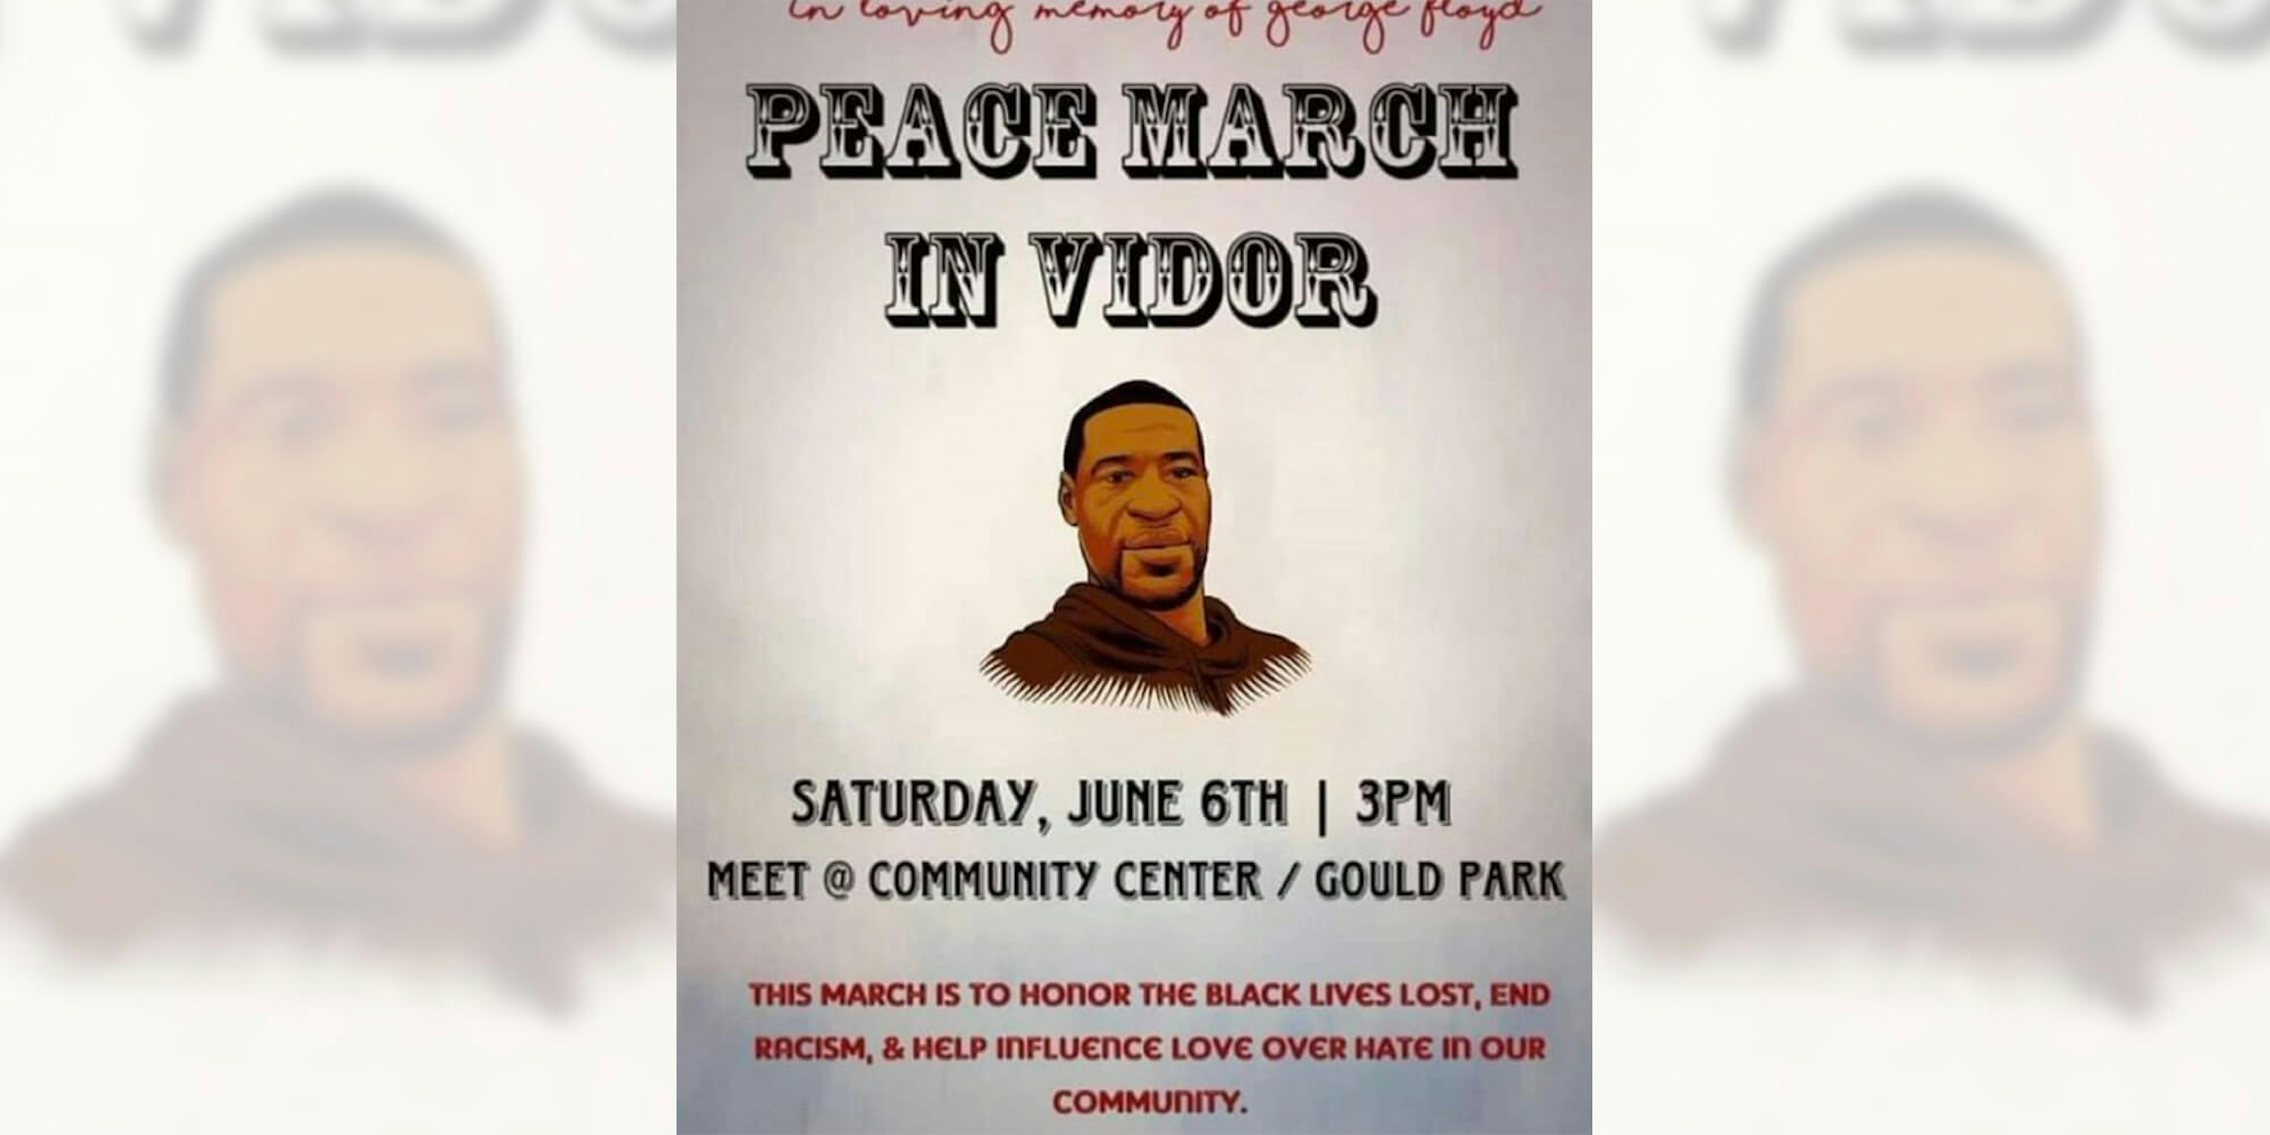 peace march in vidor poster with illustration of george floyd